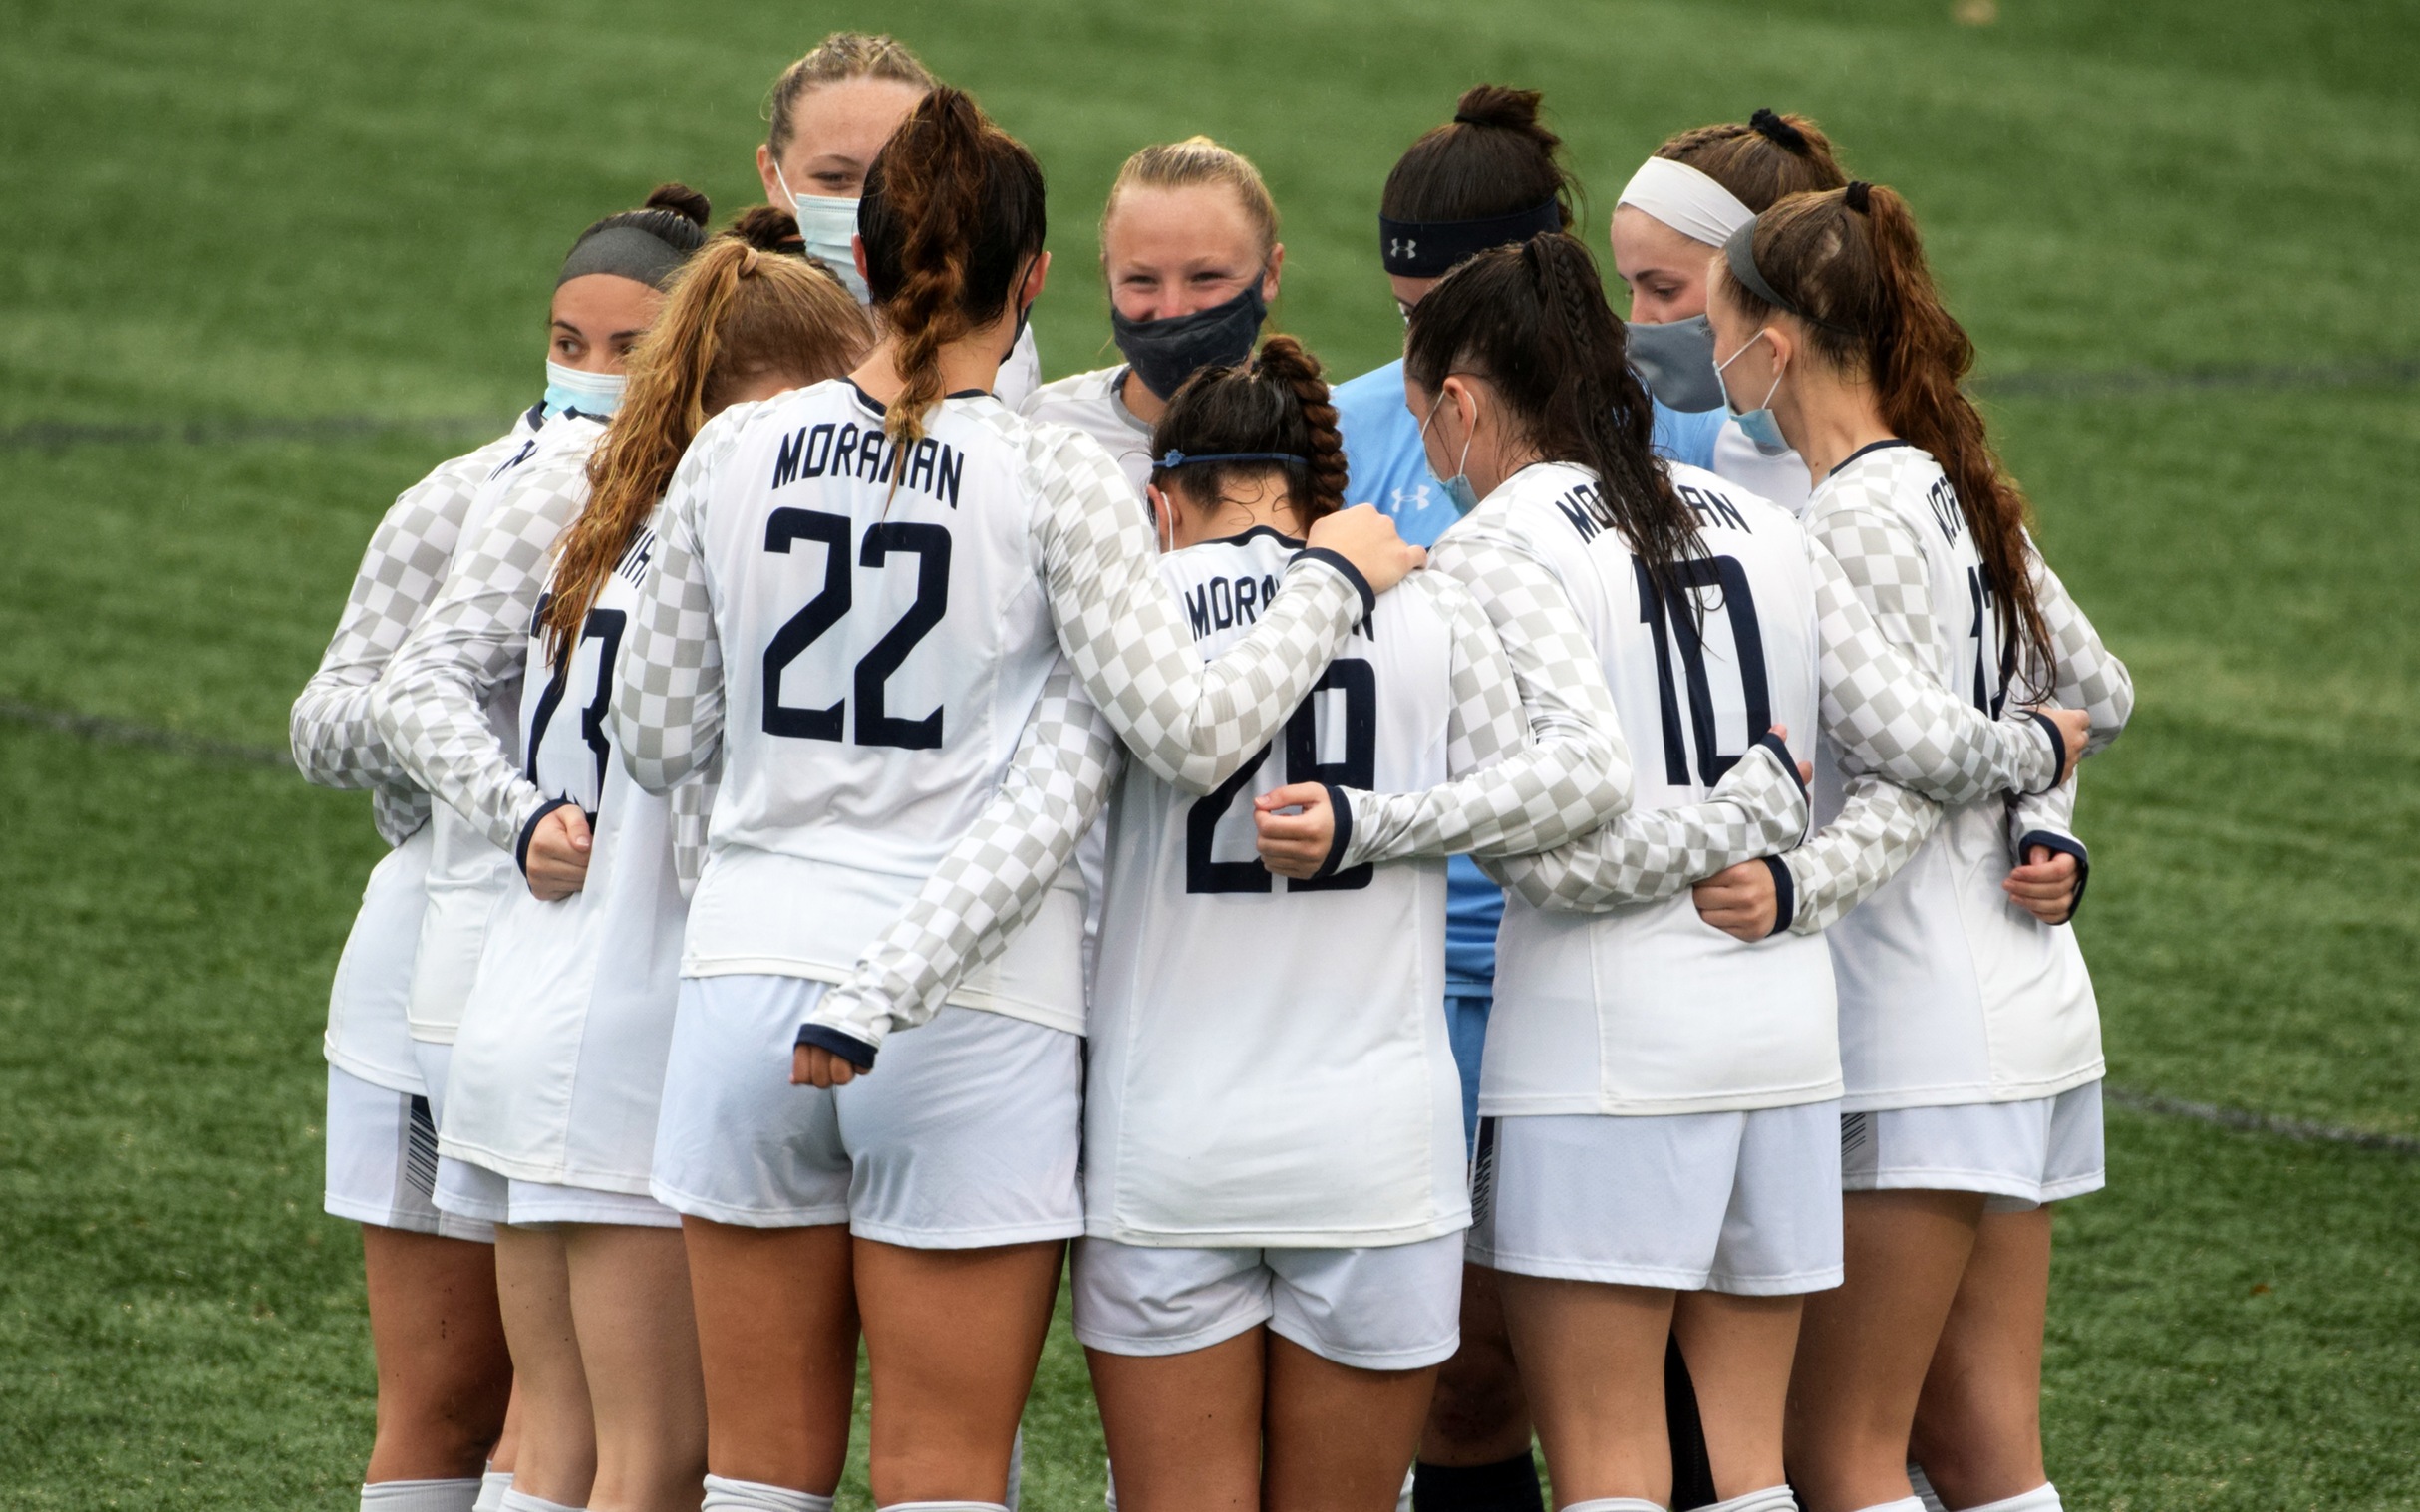 Moravian huddles before a match during the 2021 non-traditional season.